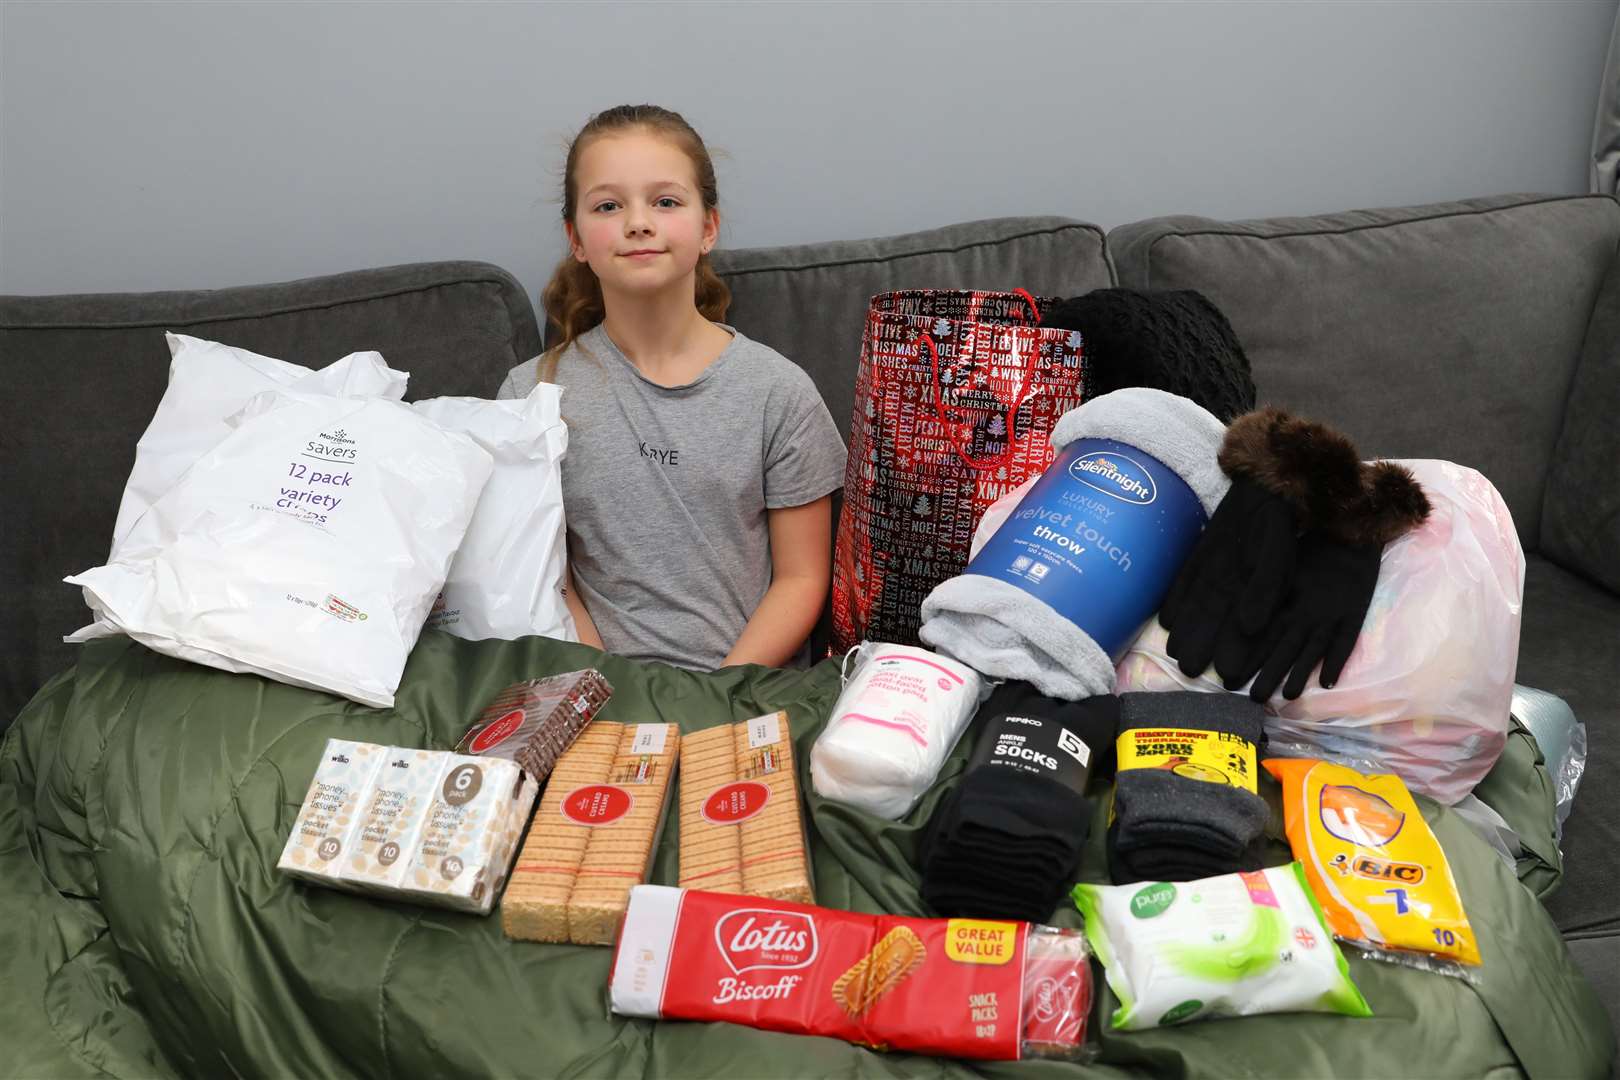 Pictured is 10 year-old Tia Temple who is collecting donations for the homeless